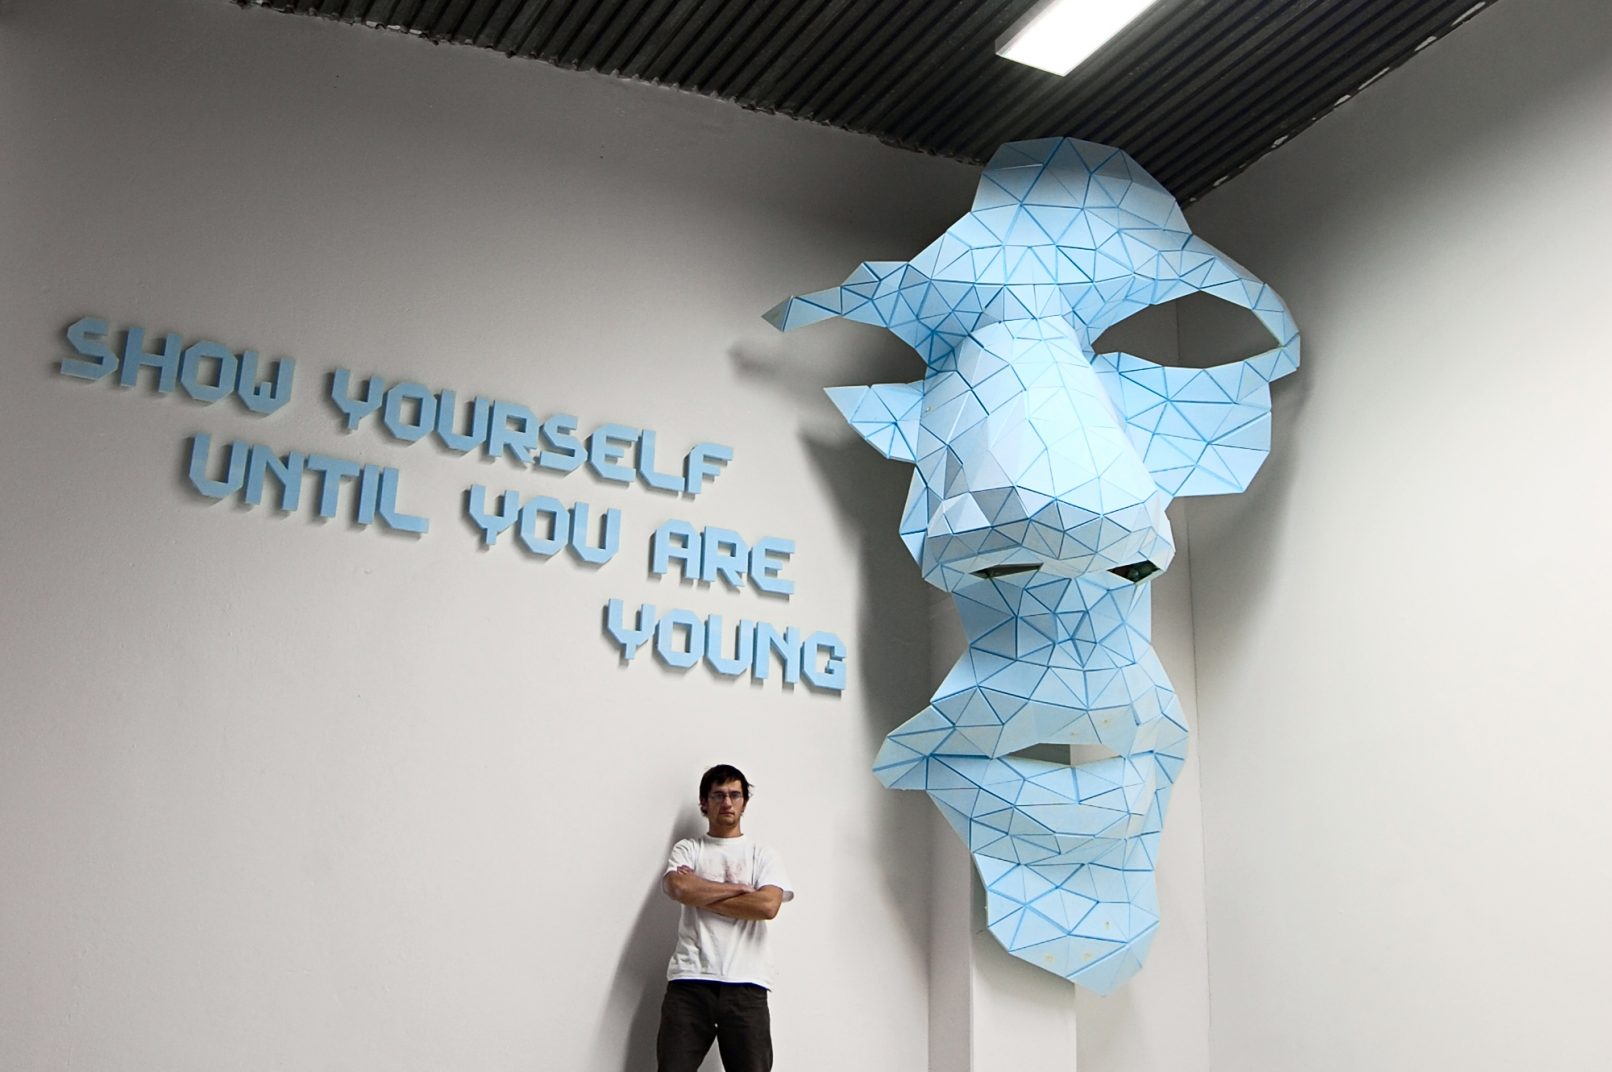 show yourself until you are young